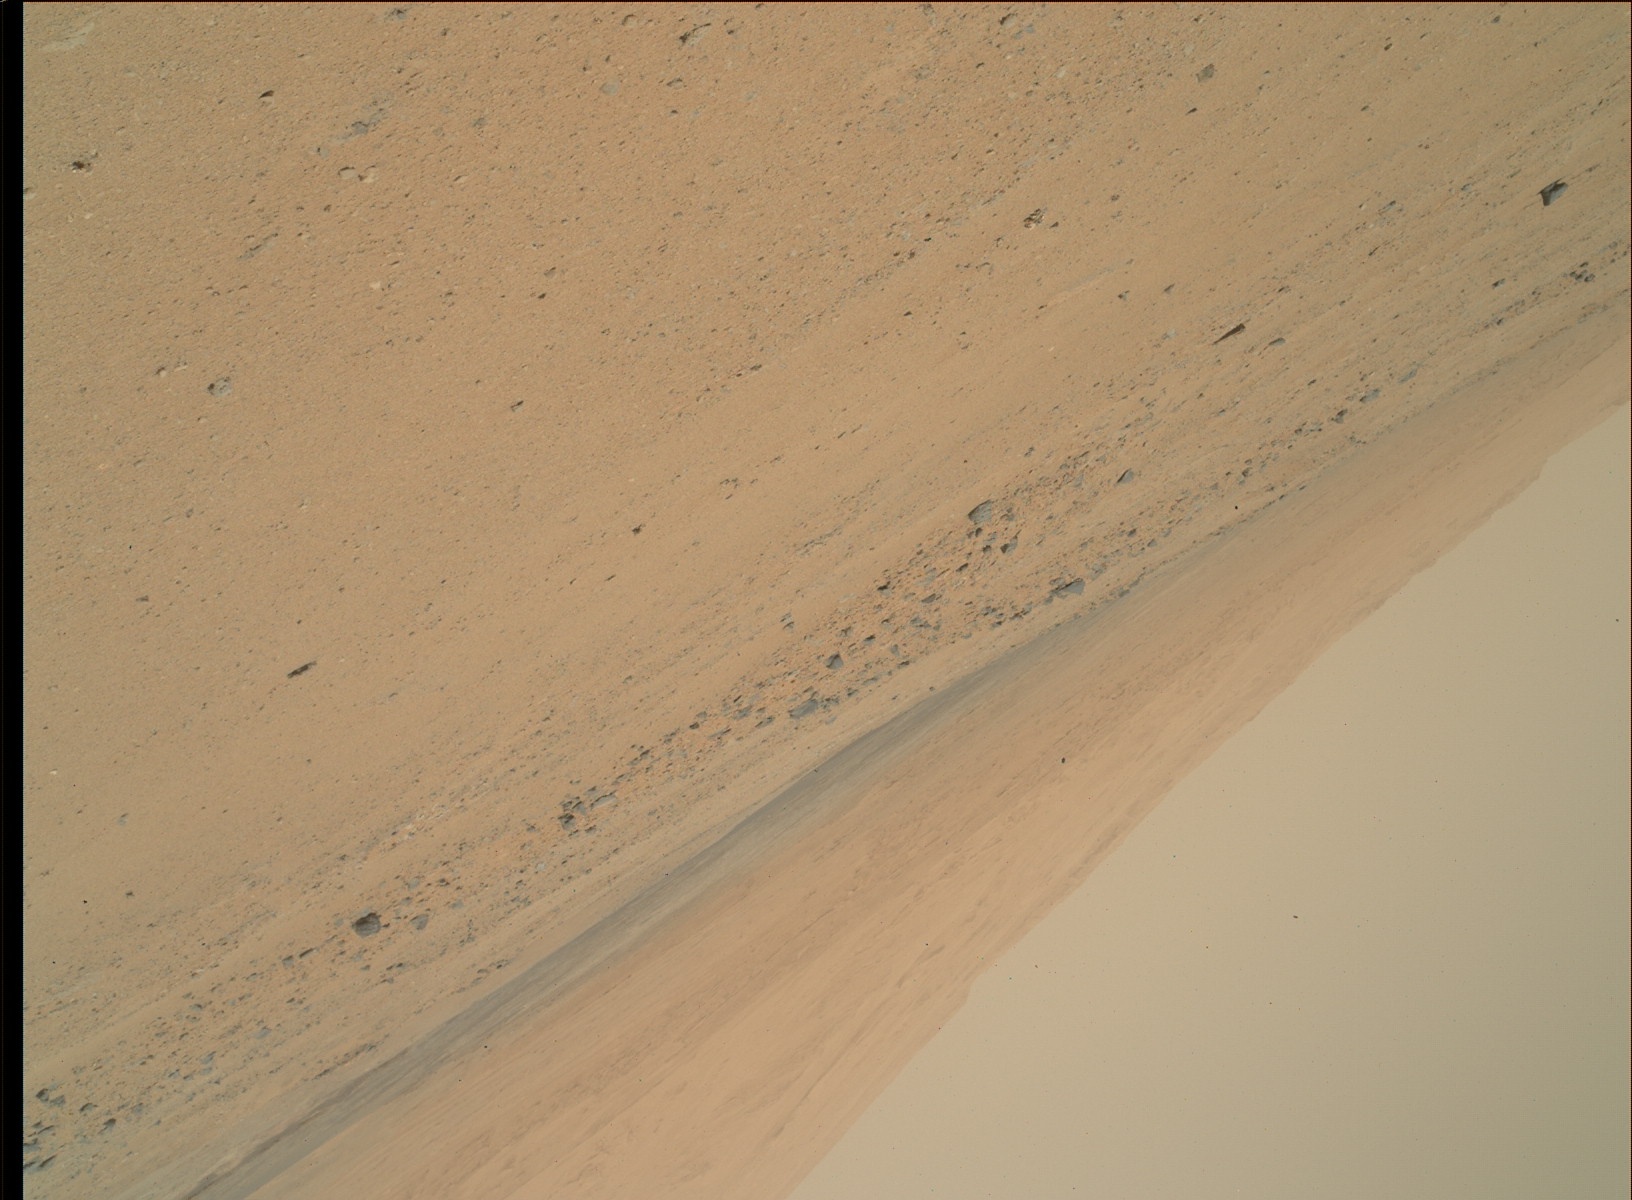 Nasa's Mars rover Curiosity acquired this image using its Mars Hand Lens Imager (MAHLI) on Sol 369